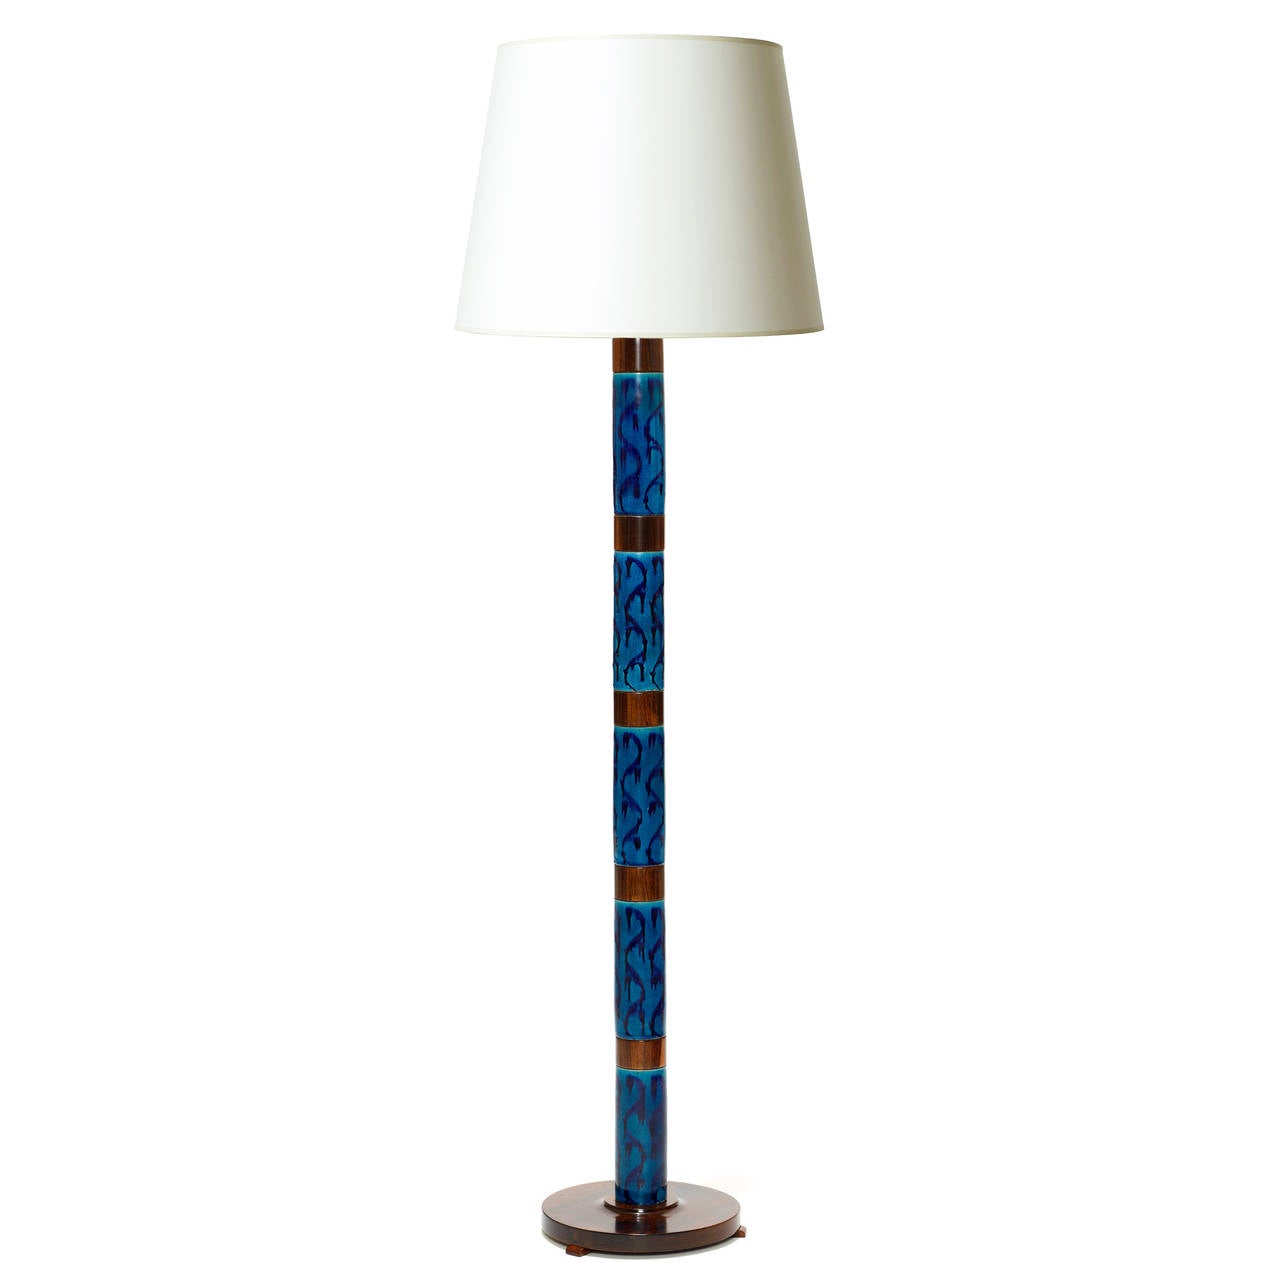 Rare model standing lamp with exceptional hand-painted blue-on-blue tiles alternating with sections of rosewood, with round palisander base, designed by Stig Lindberg (1916-1982) for Gustavsberg, Sweden, mid-20th century. (Note: The tiles are